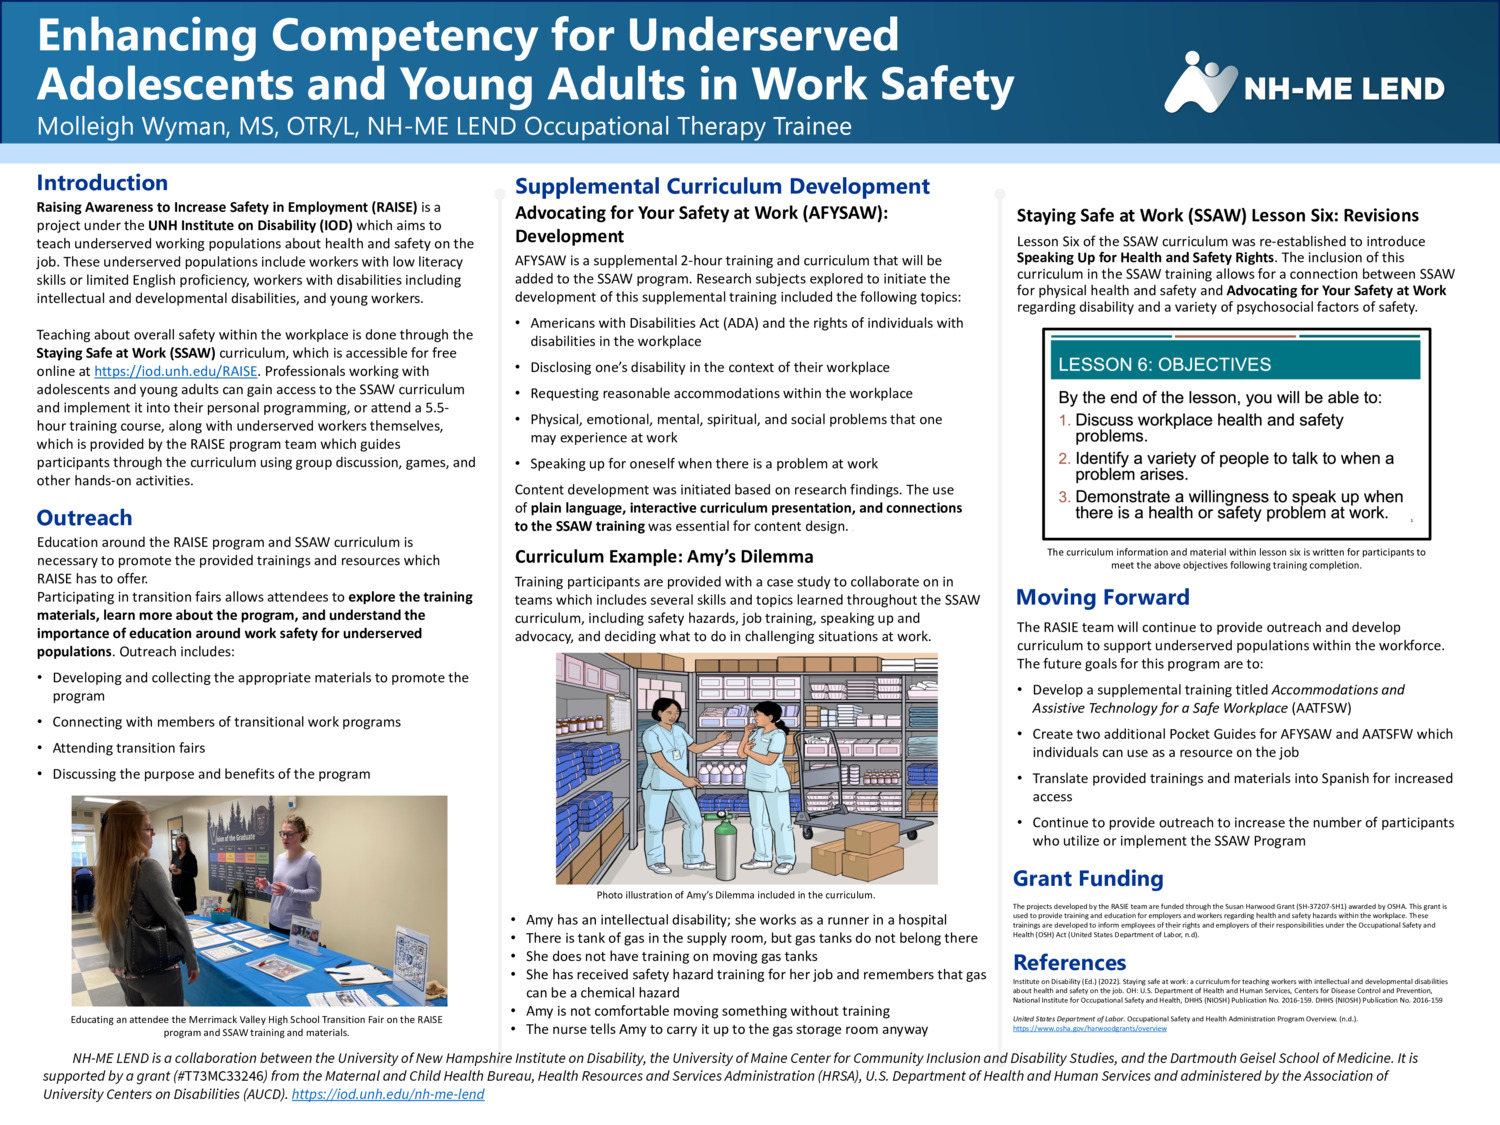 Enhancing Competency For Underserved Adolescents And Young Adults In Work Safety by mmw1033